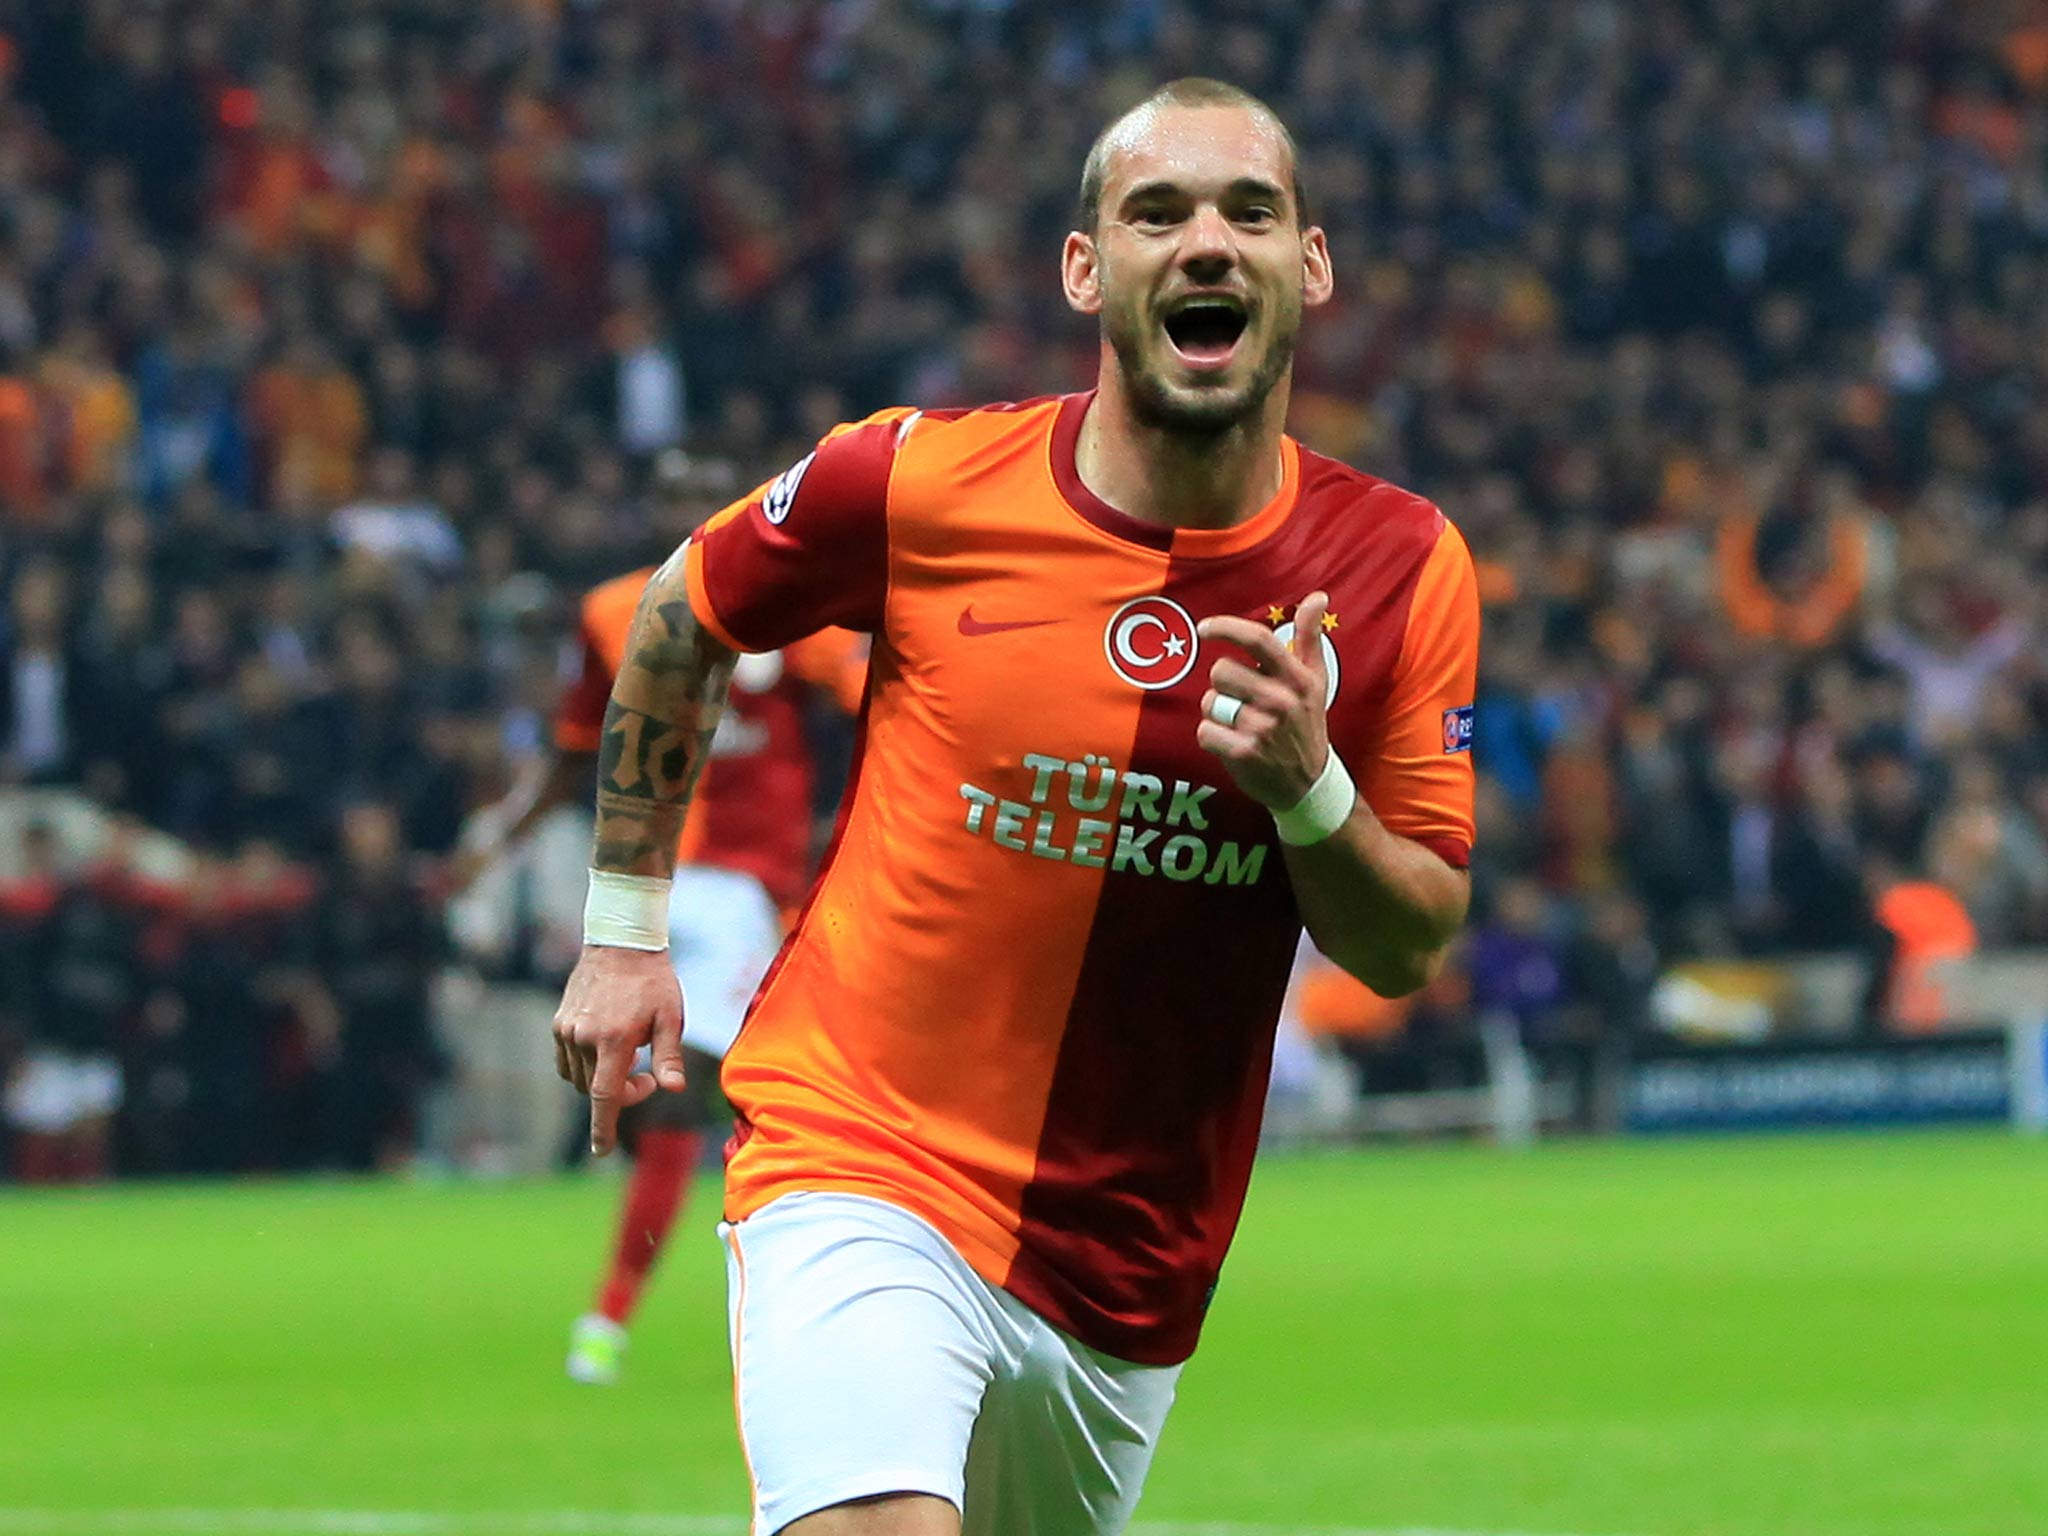 Wesley Sneijder could be on his way to Manchester United